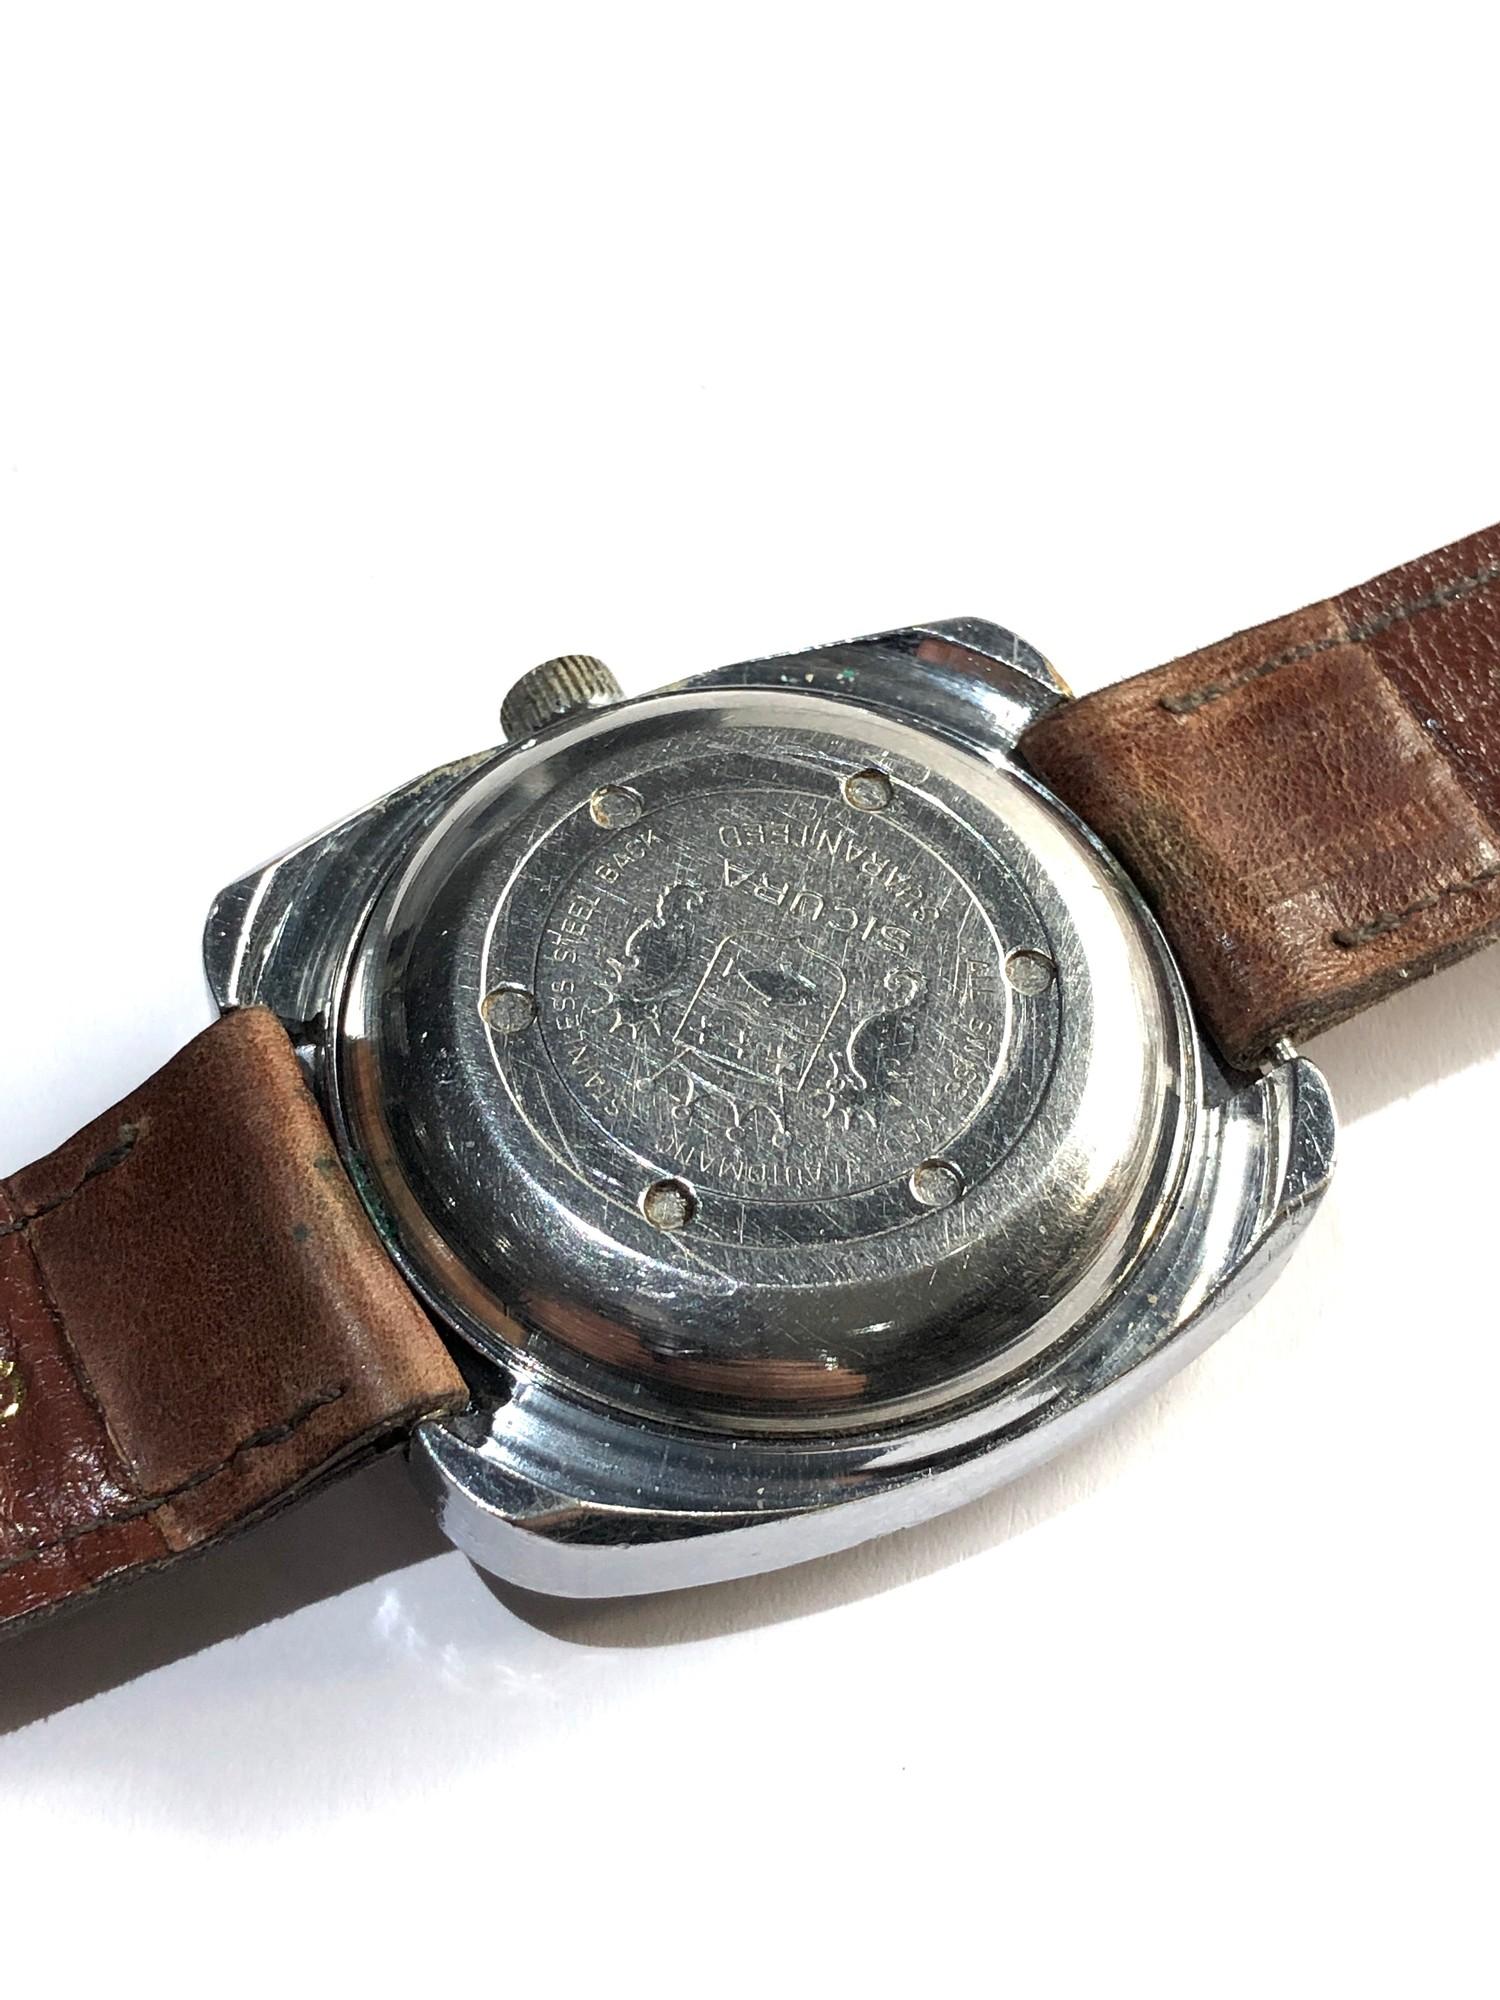 Vintage Sicura Automatic 25 Jewels wrist watch in wrking order but no warranty given - Image 3 of 3